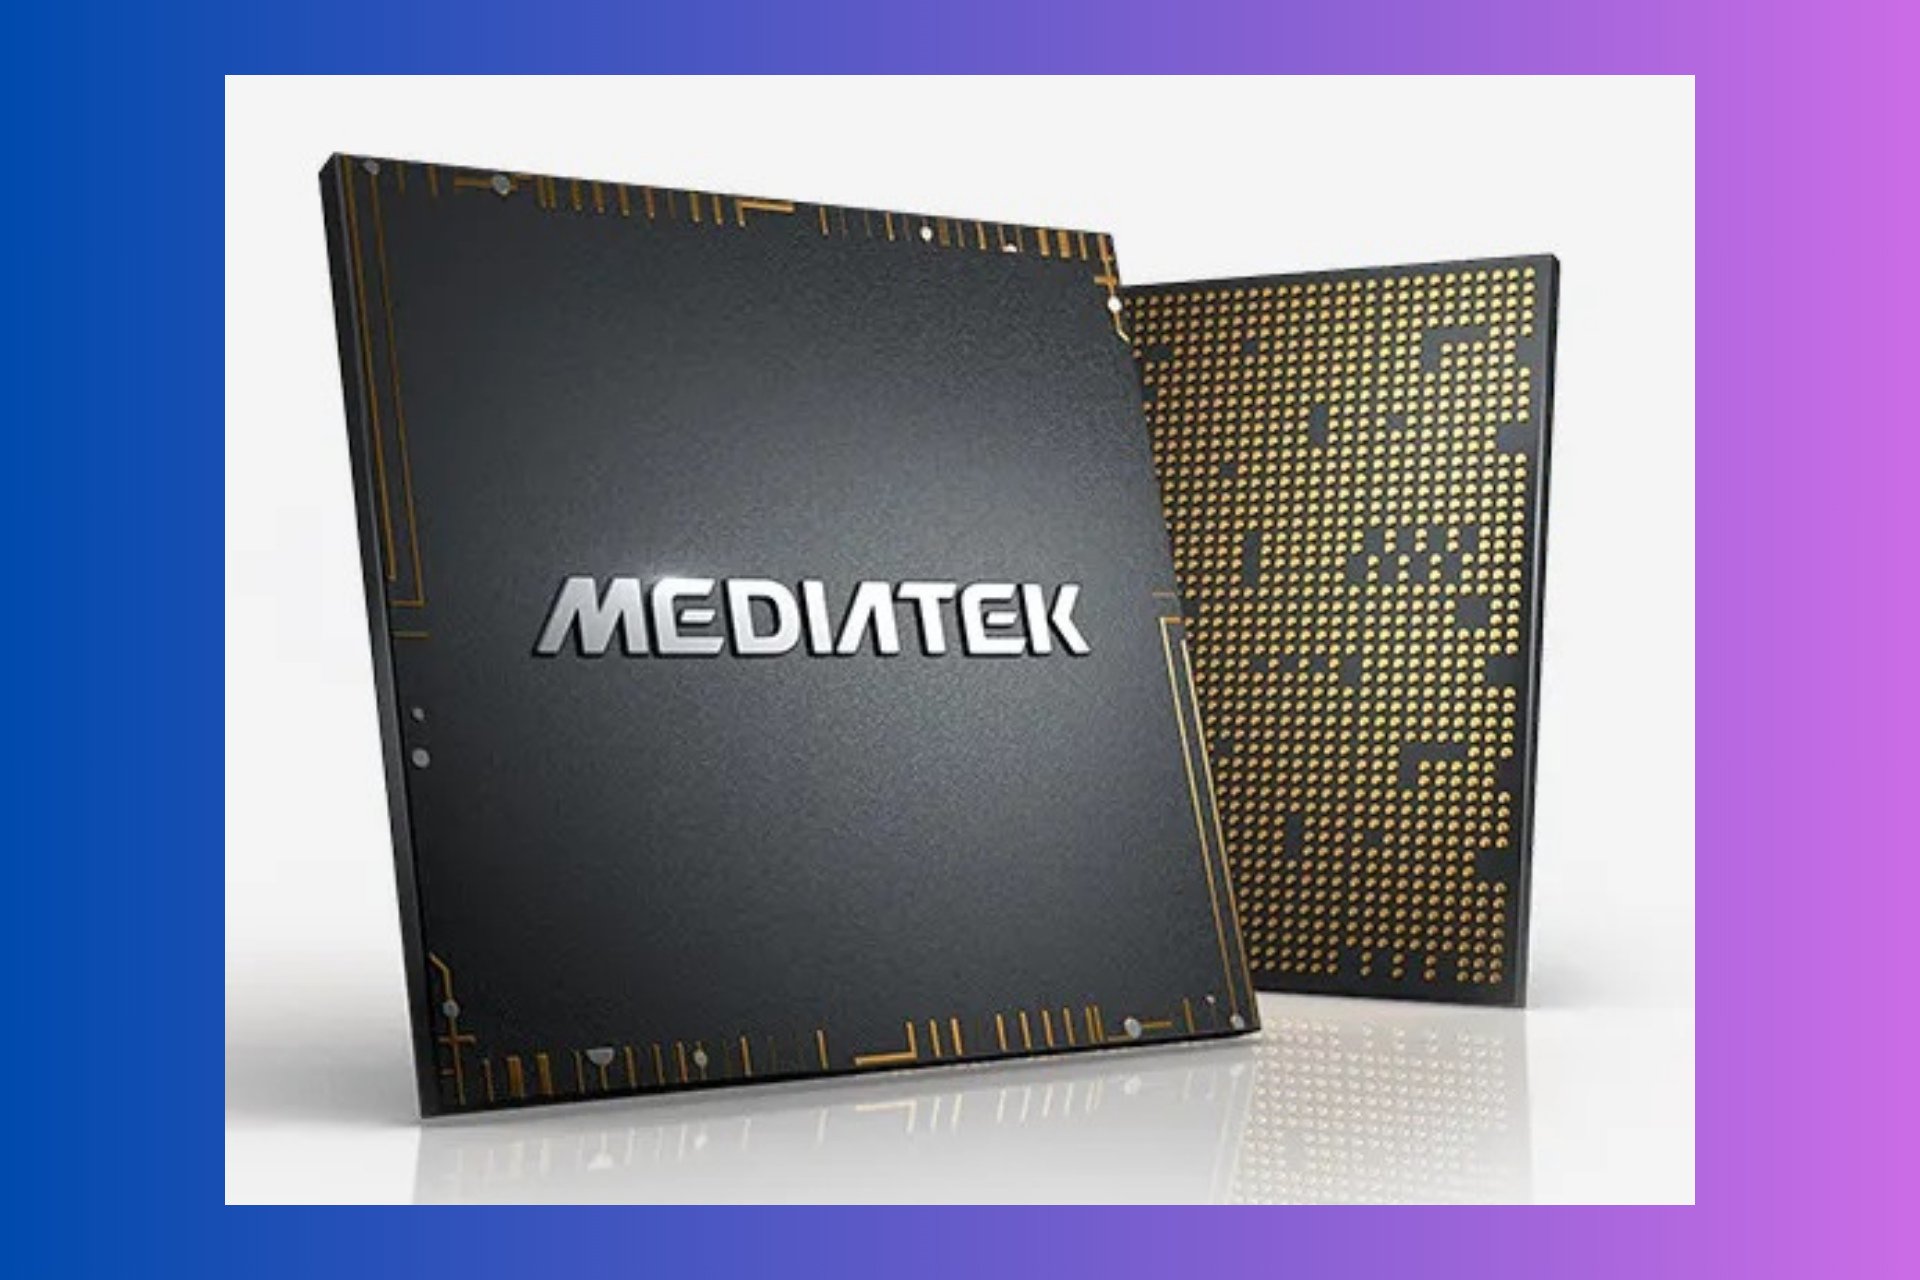 Mediatek might launch Arm-based laptop chips next year